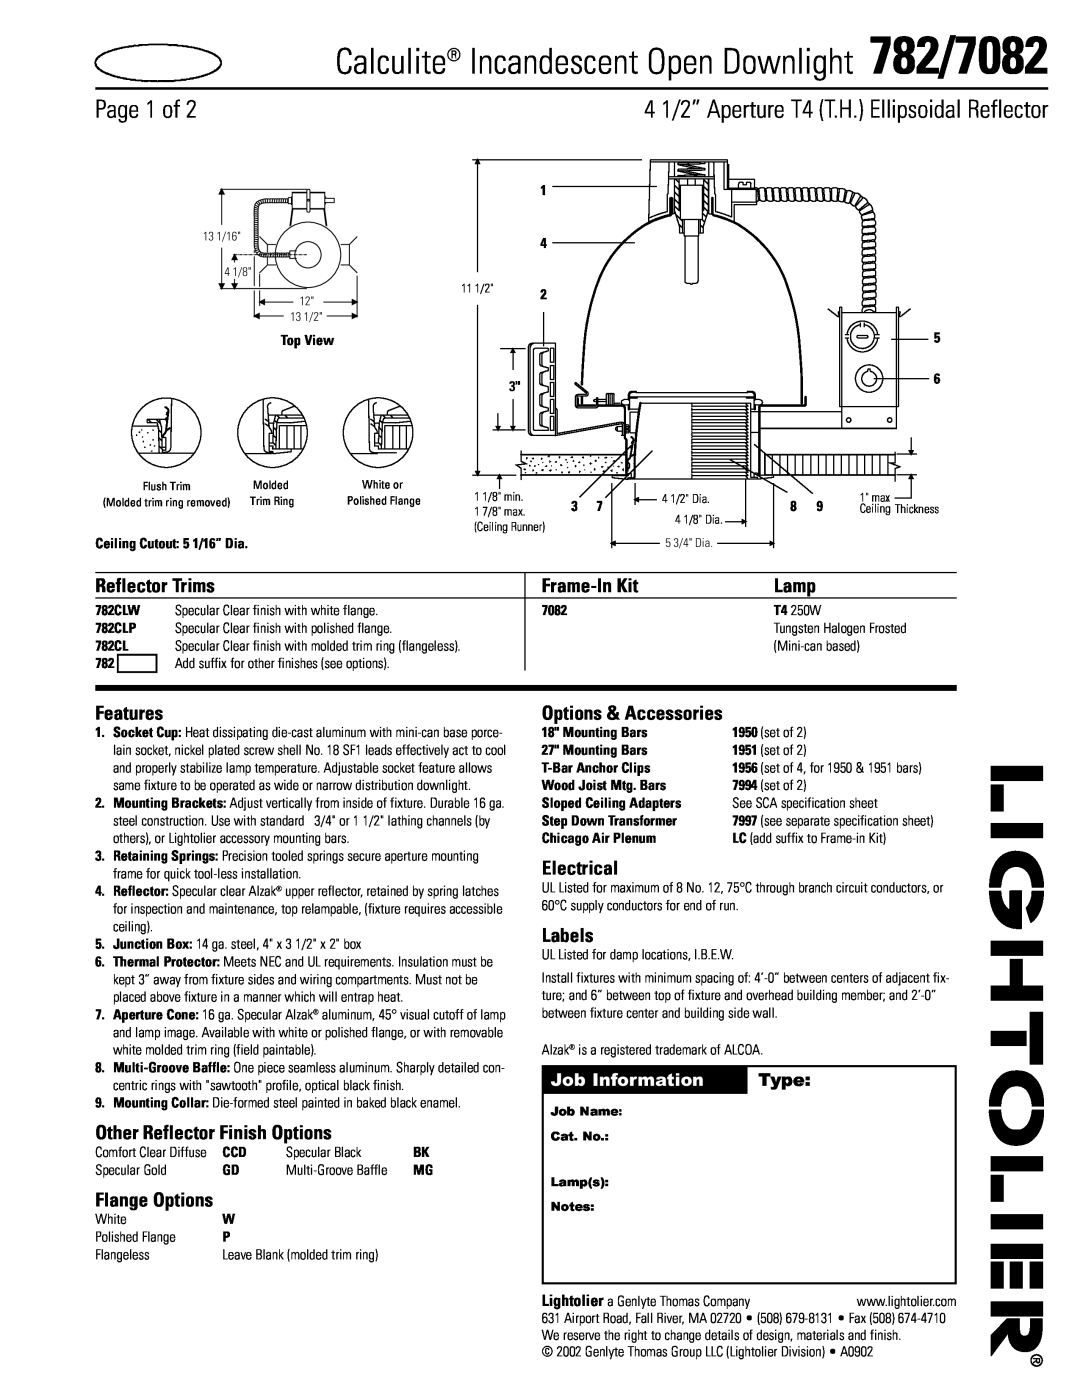 Lightolier specifications Calculite Incandescent Open Downlight 782/7082, Page 1 of, Job Information, Type, Frame-InKit 